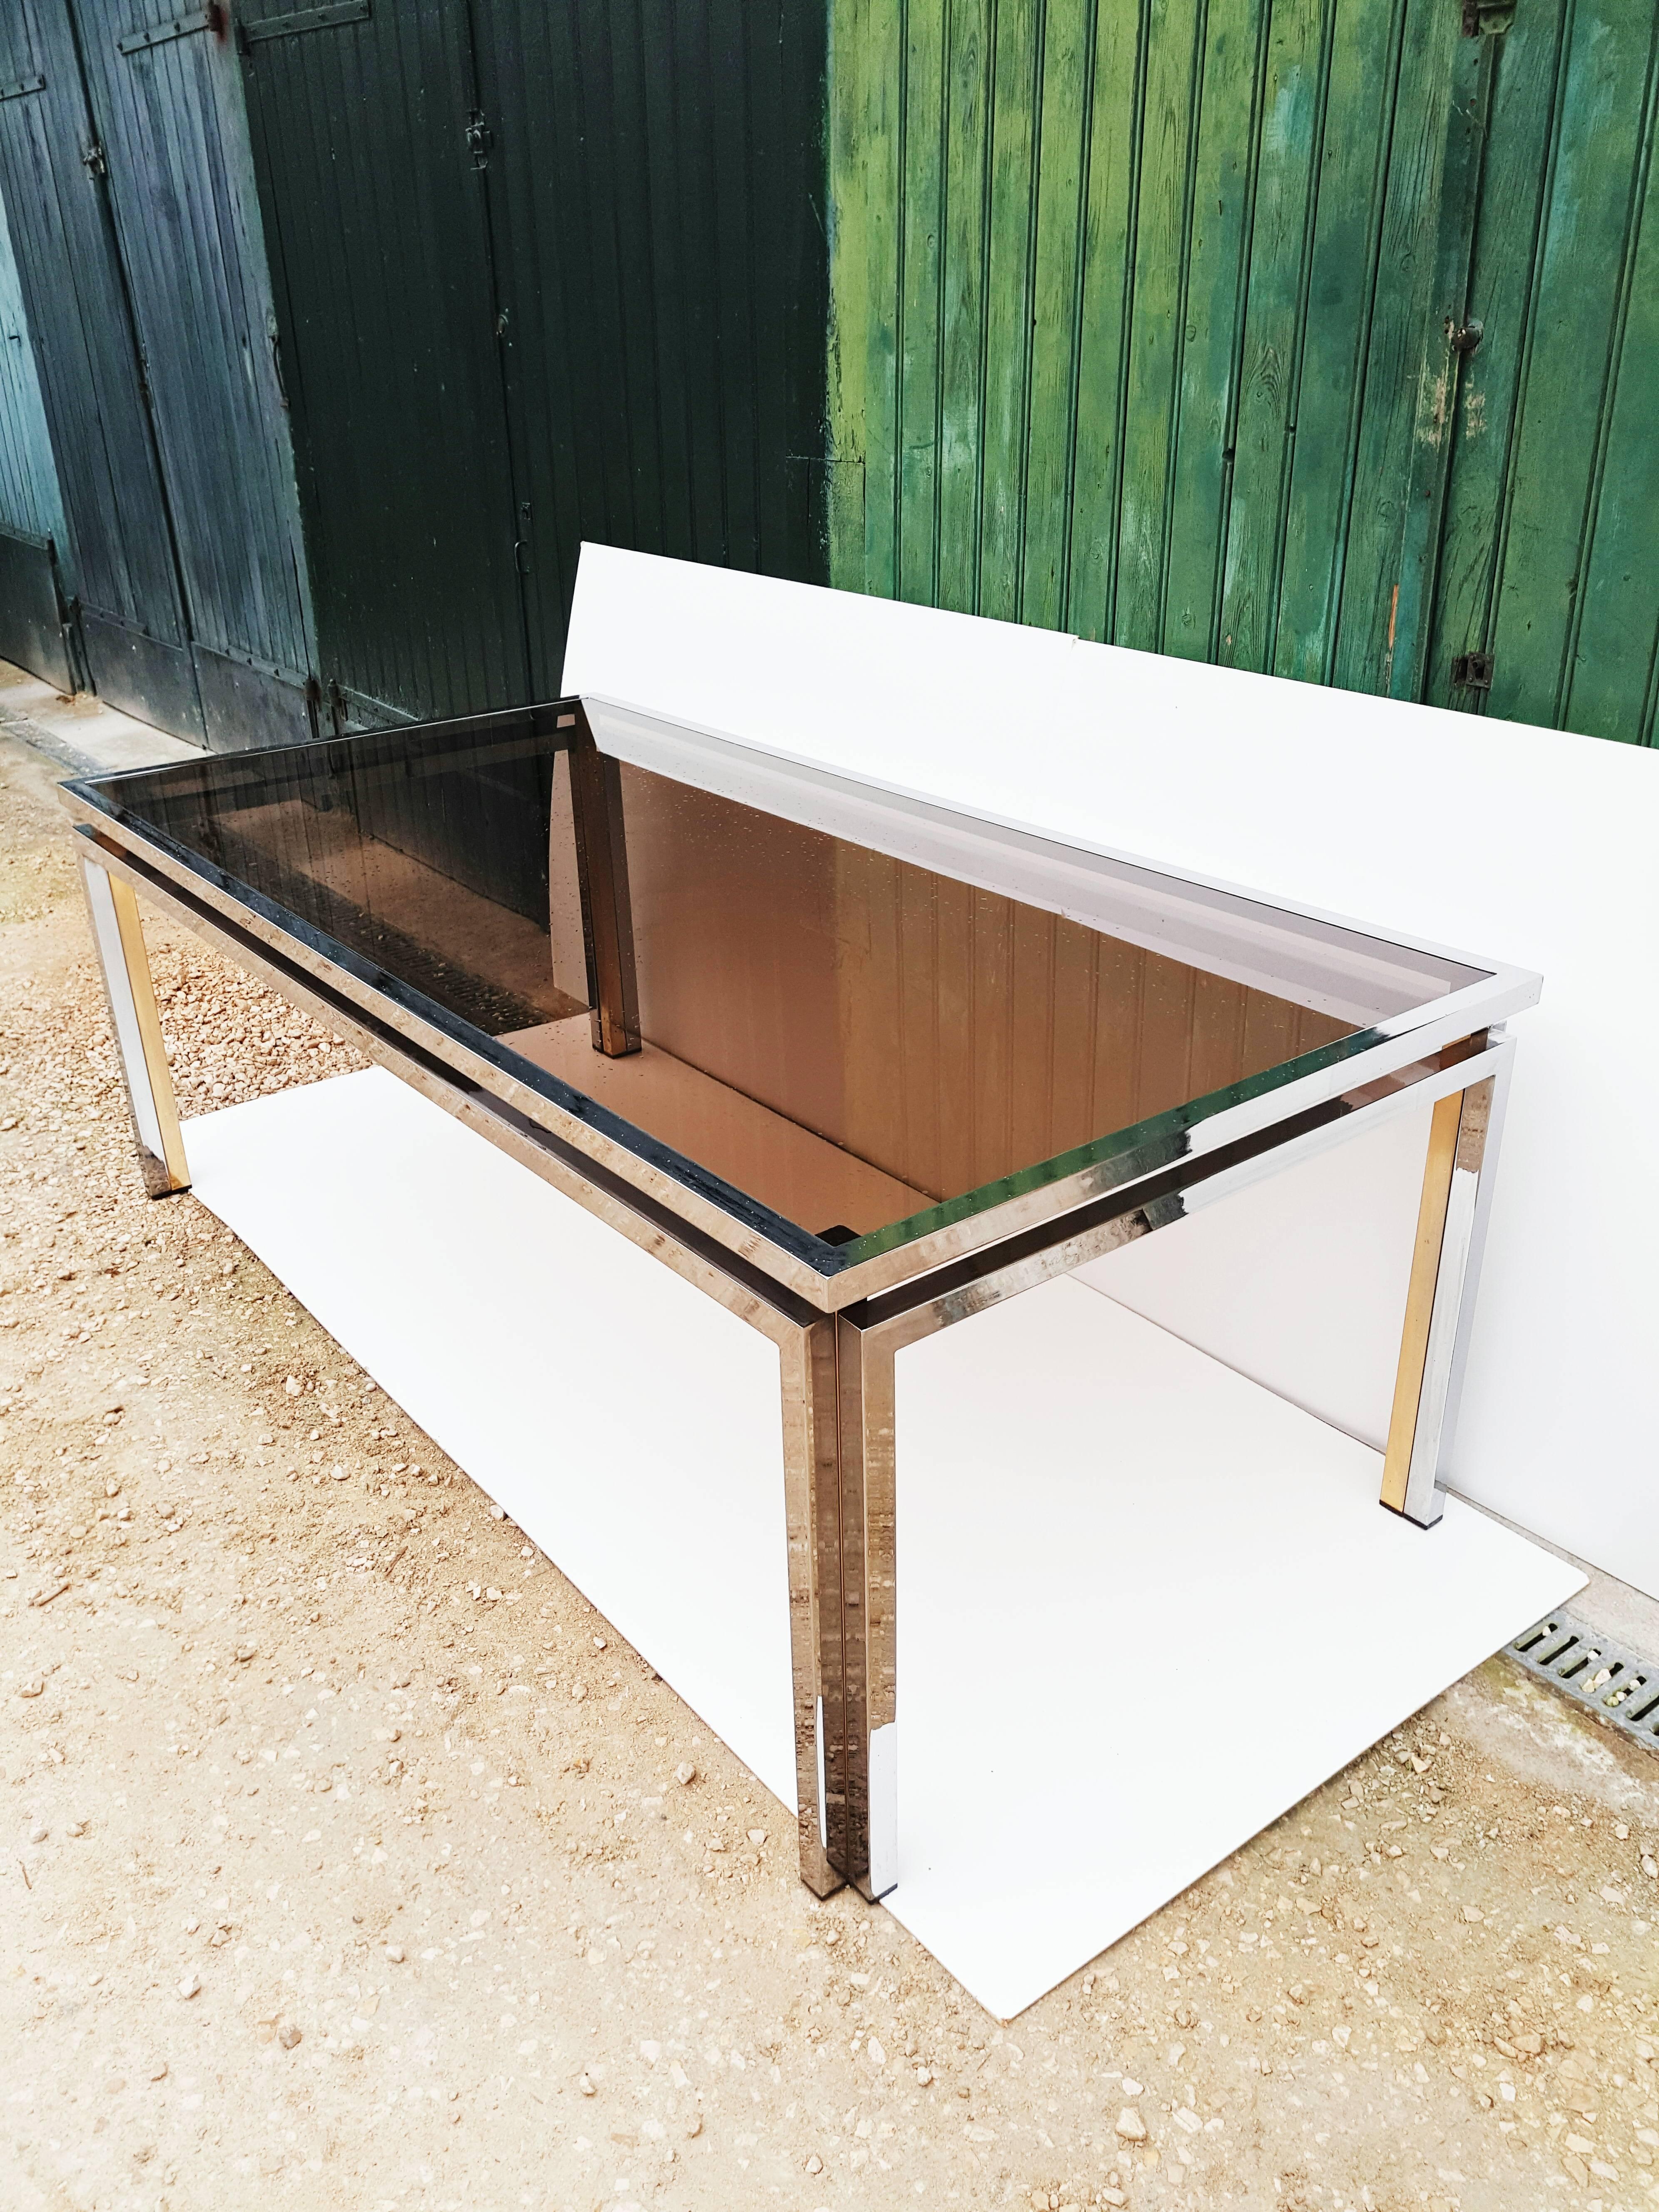 Superb Italian 1970s modern dining table with floating smoked glass top by Romeo Rega. This superb table could also make a super dramatic writing desk or library table.
The original smoked glass top has a bronze mirrored edge that adds depth and